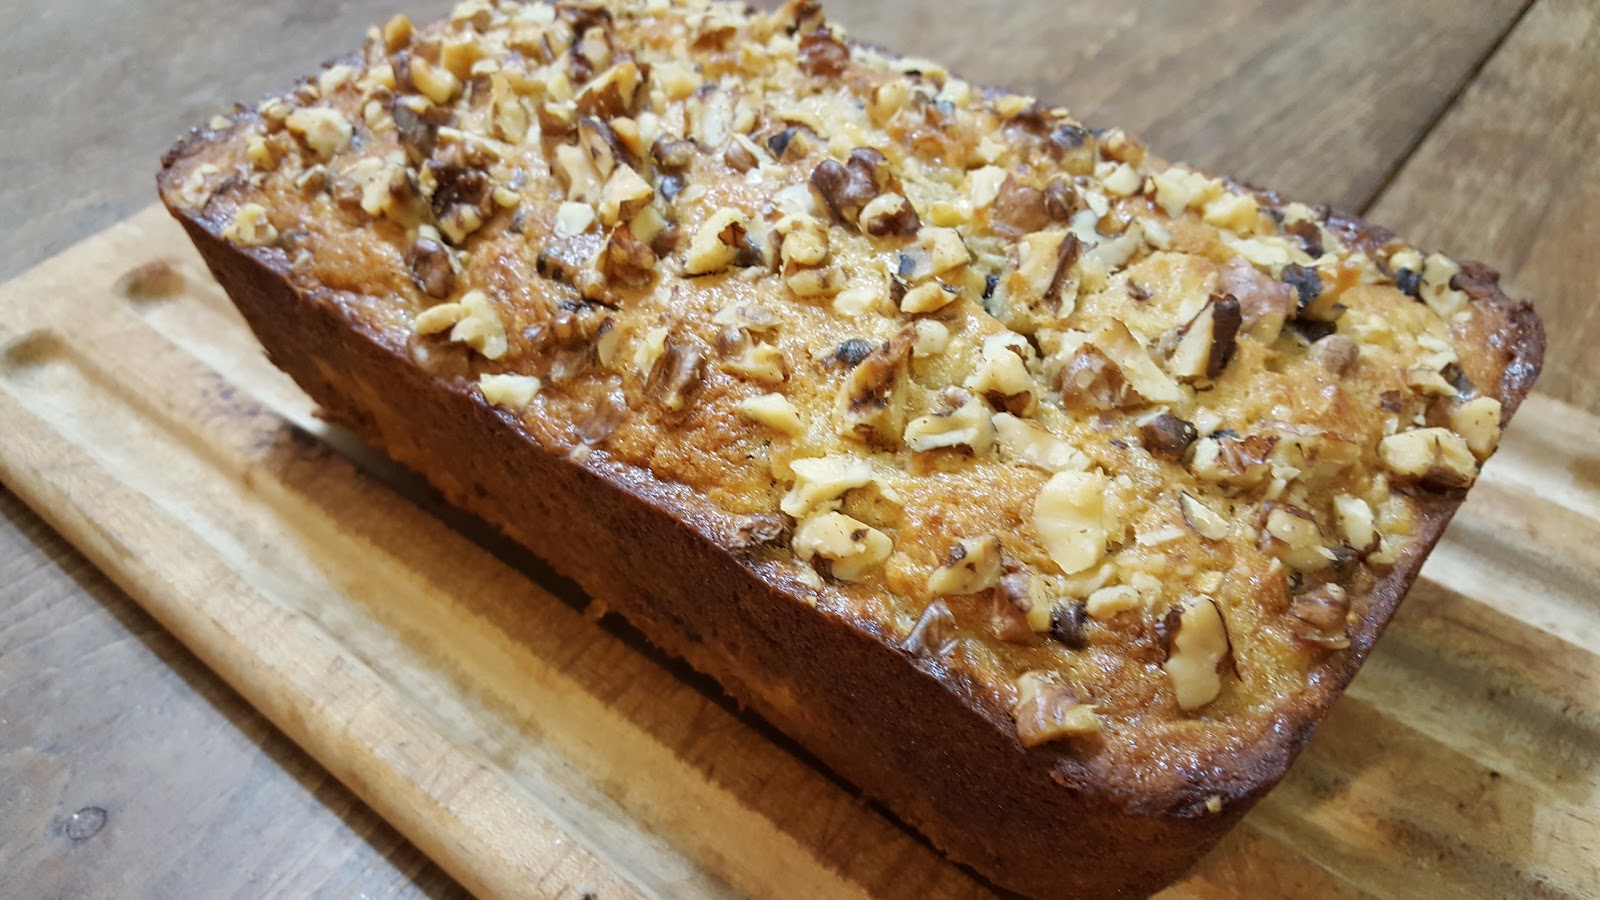 My Patchwork Quilt: LOADED BANANA BREAD